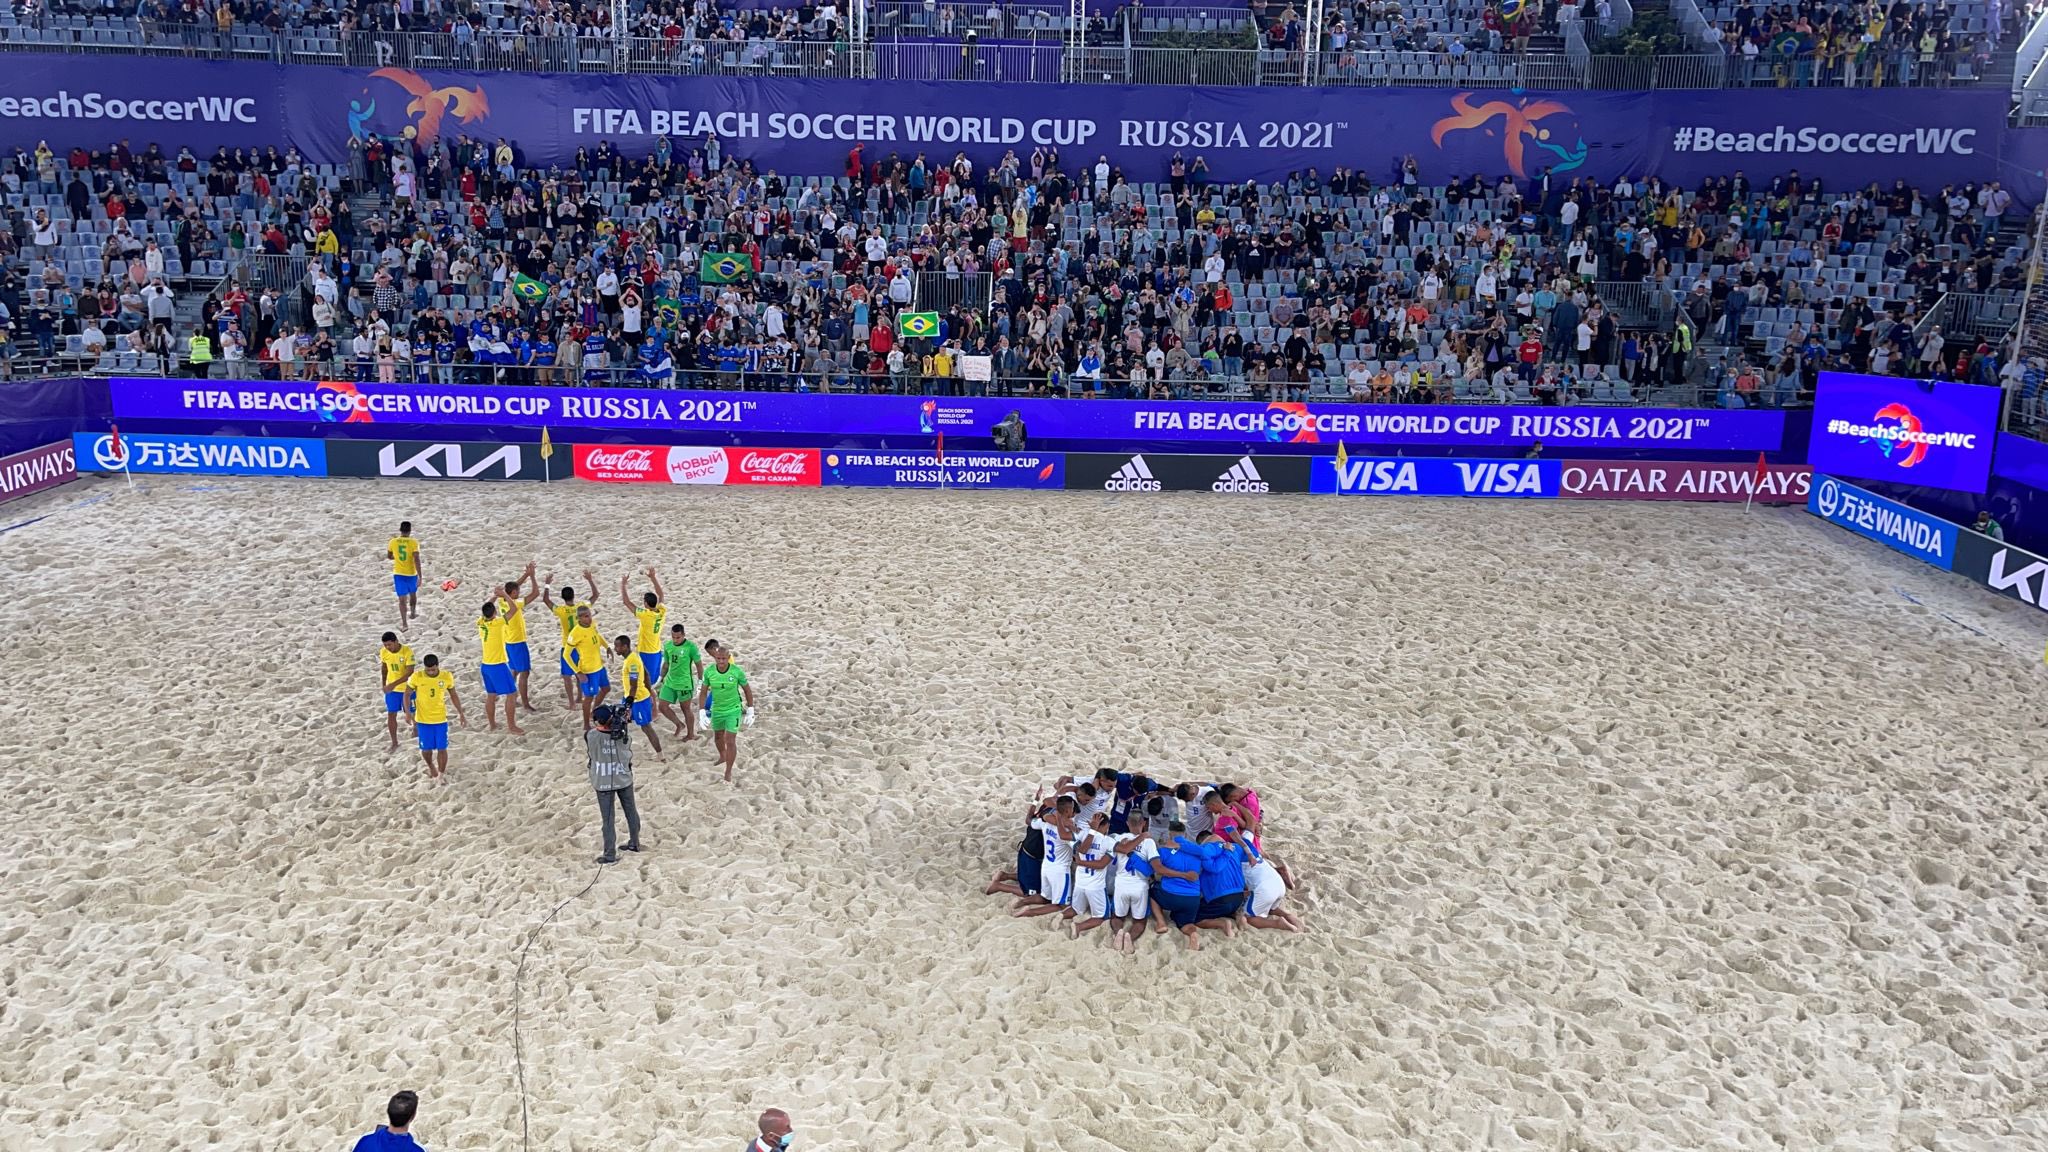 Fatma Samoura on X: "Final score: 🇧🇷4🇸🇻2. Great game with both teams  showing tremendous power & accuracy. @FIFAcom Beach Soccer World Cup.  https://t.co/AyfZAcfzYm" / X